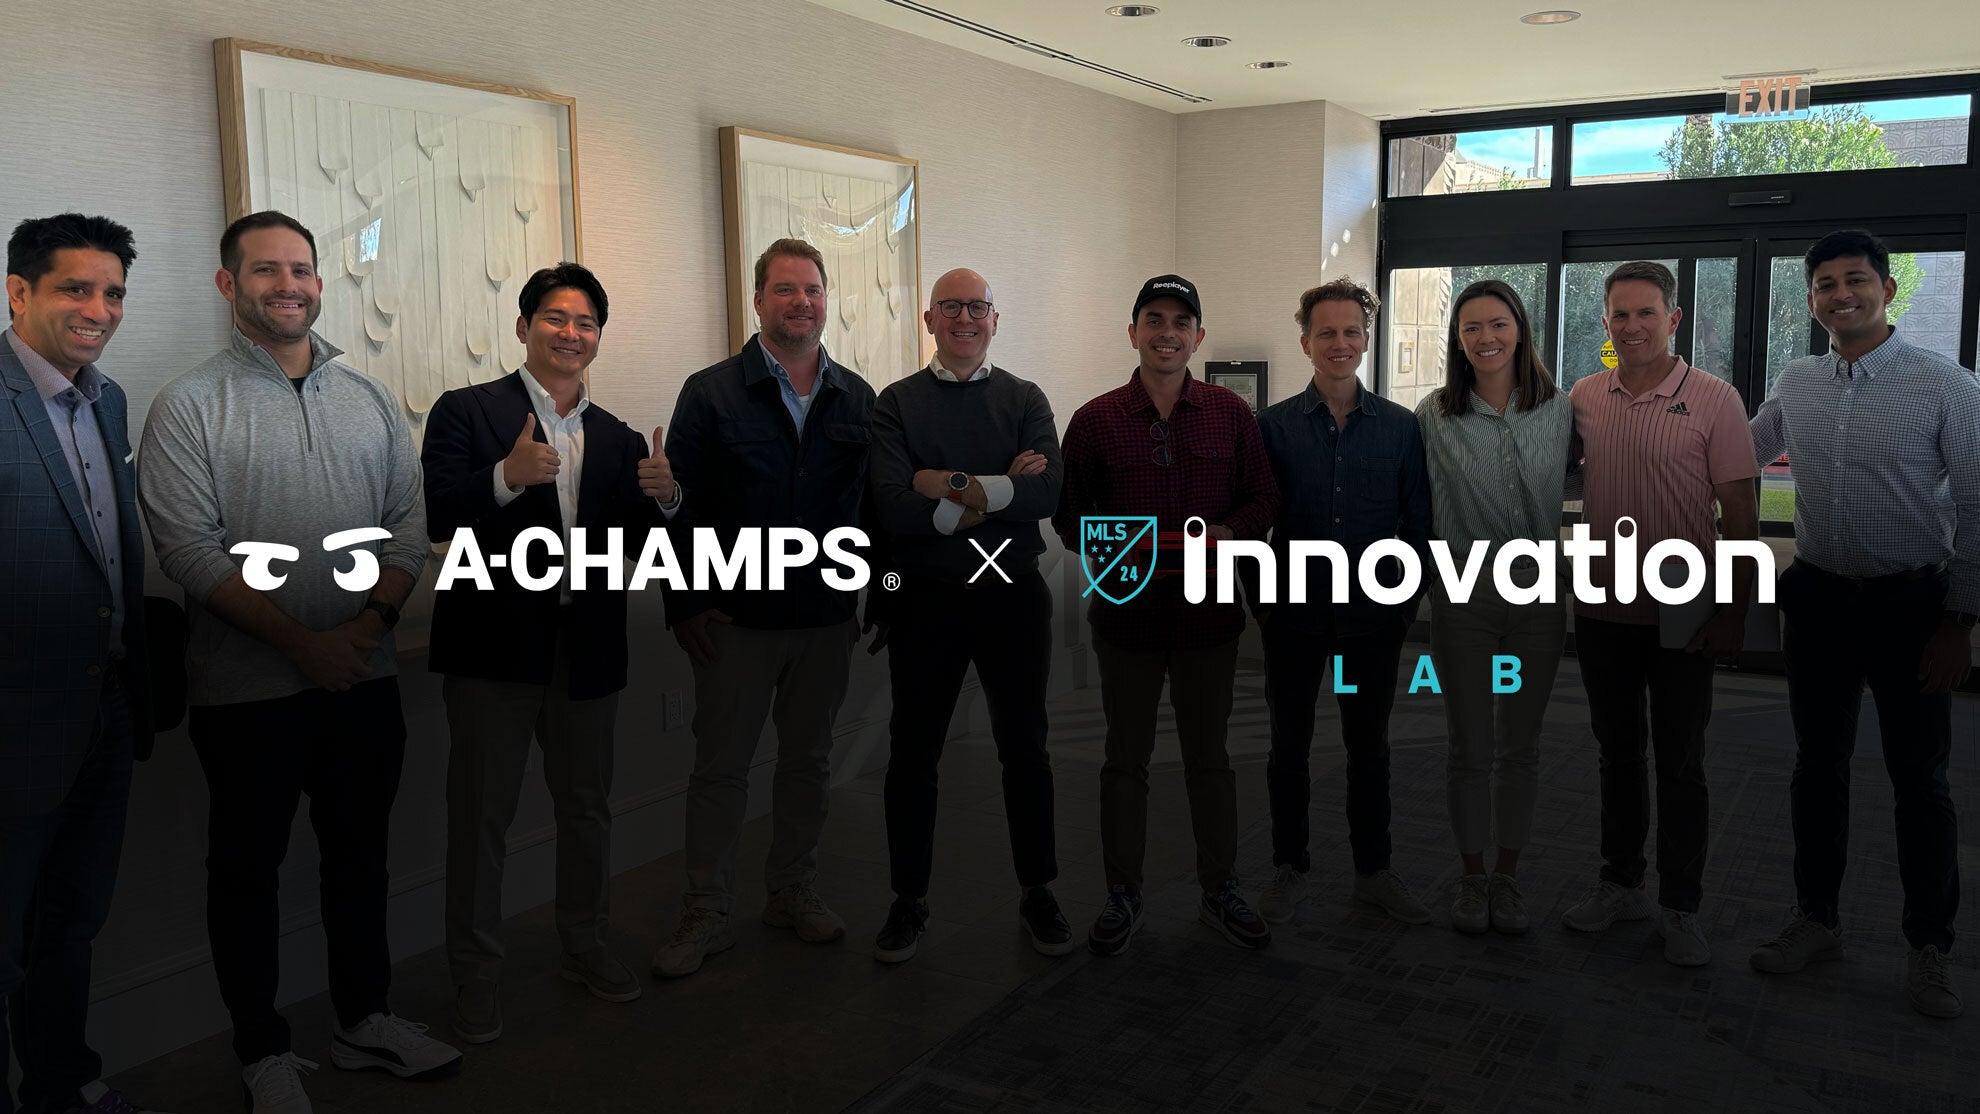 A-Champs partners with MLS Innovation LAB to help develop the next generation of athletes